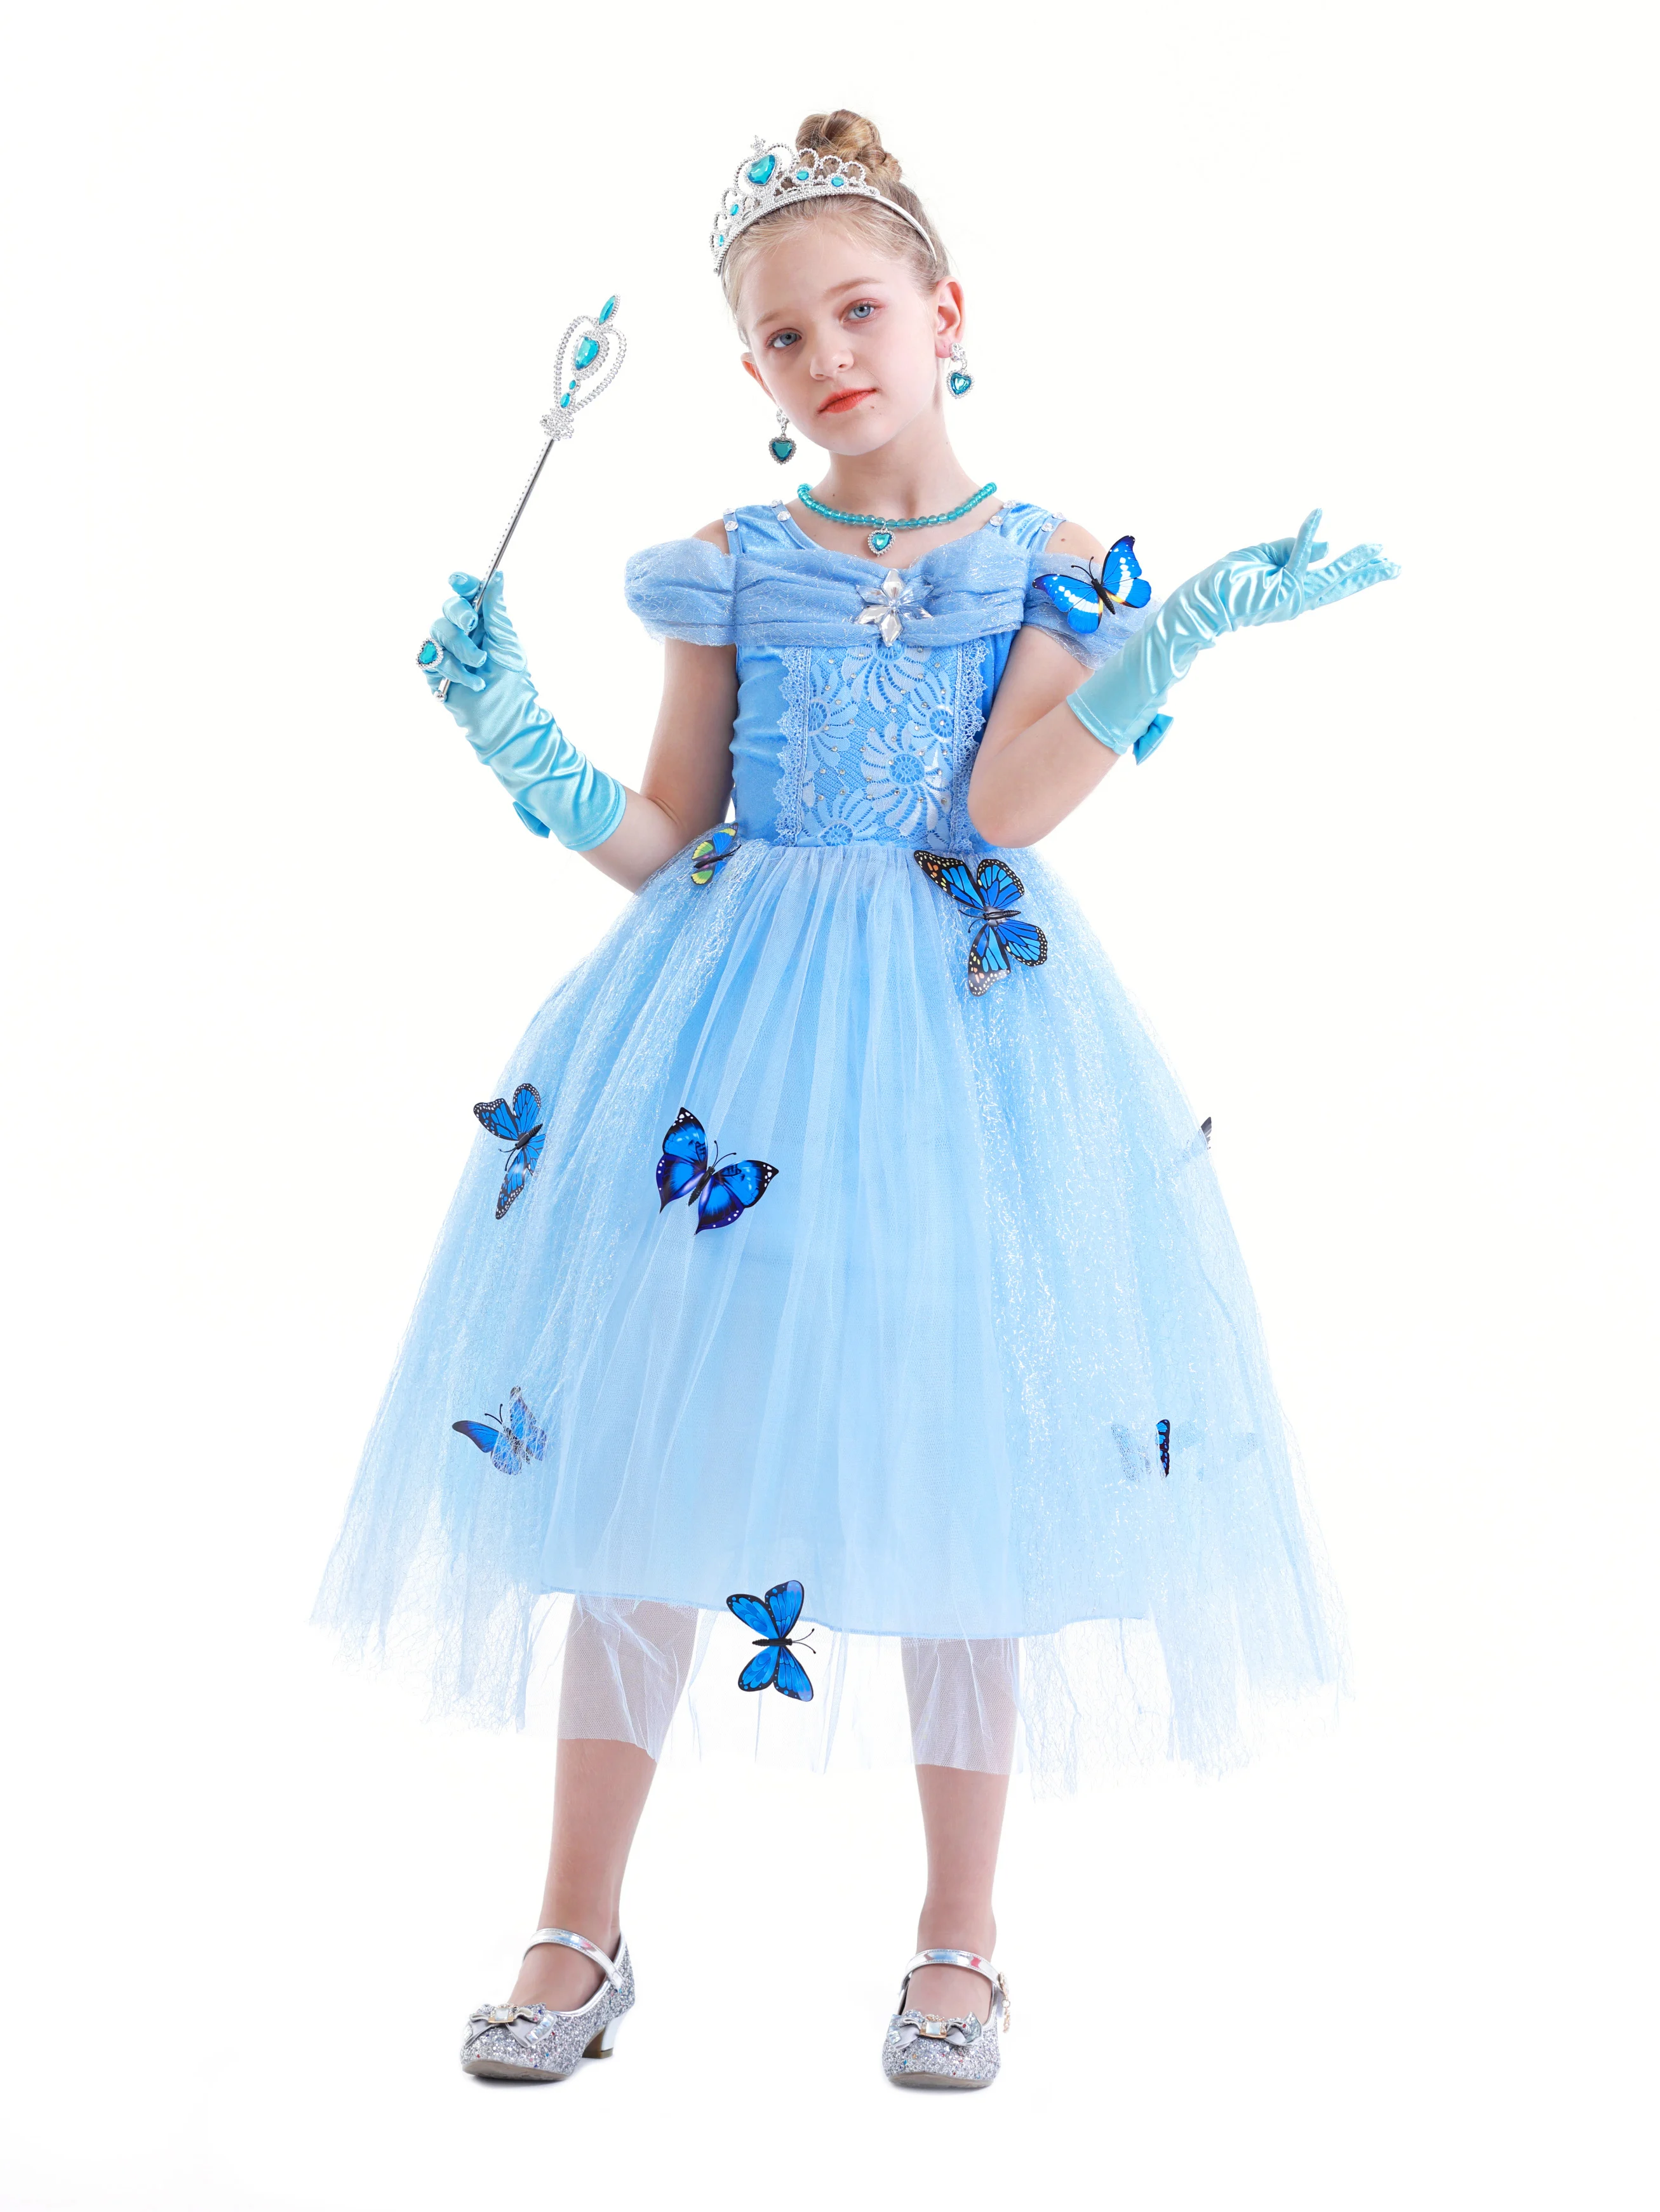 KuKiee Girls Princess Costume Halloween Cosplay Party Dress Up 2T-3T/100, Blue with Accessories 